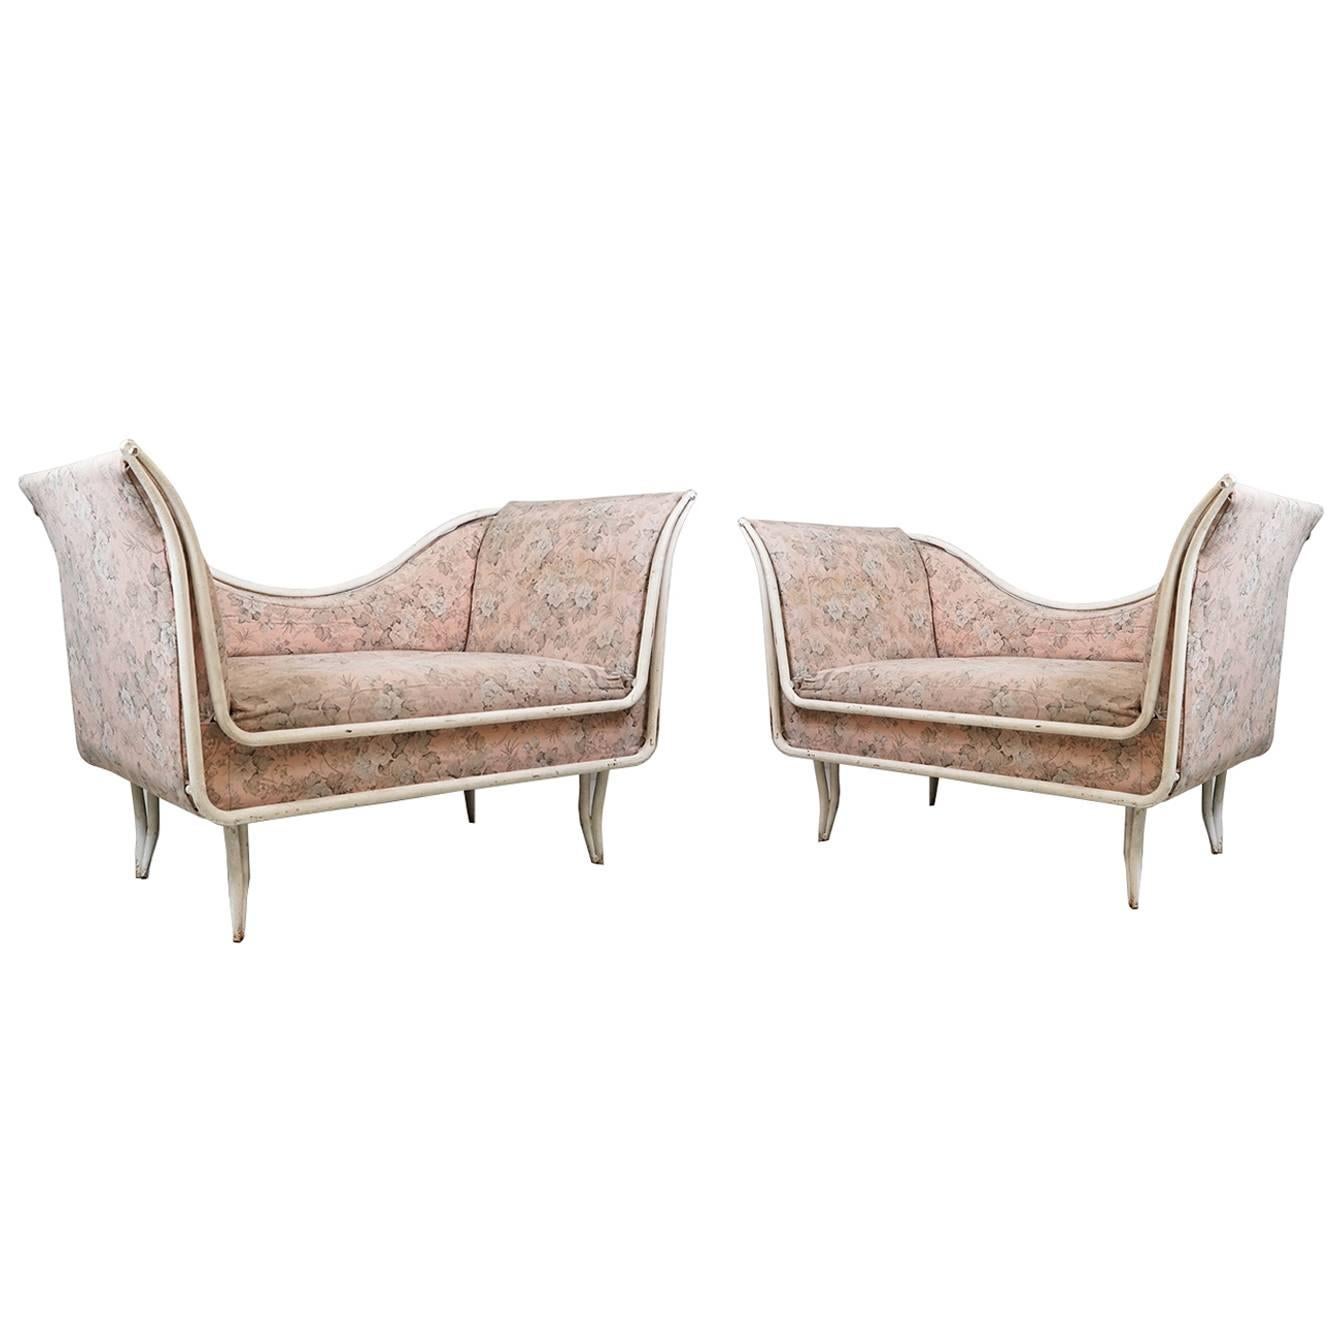 Pair of Small Sofas from Italy, circa 1940